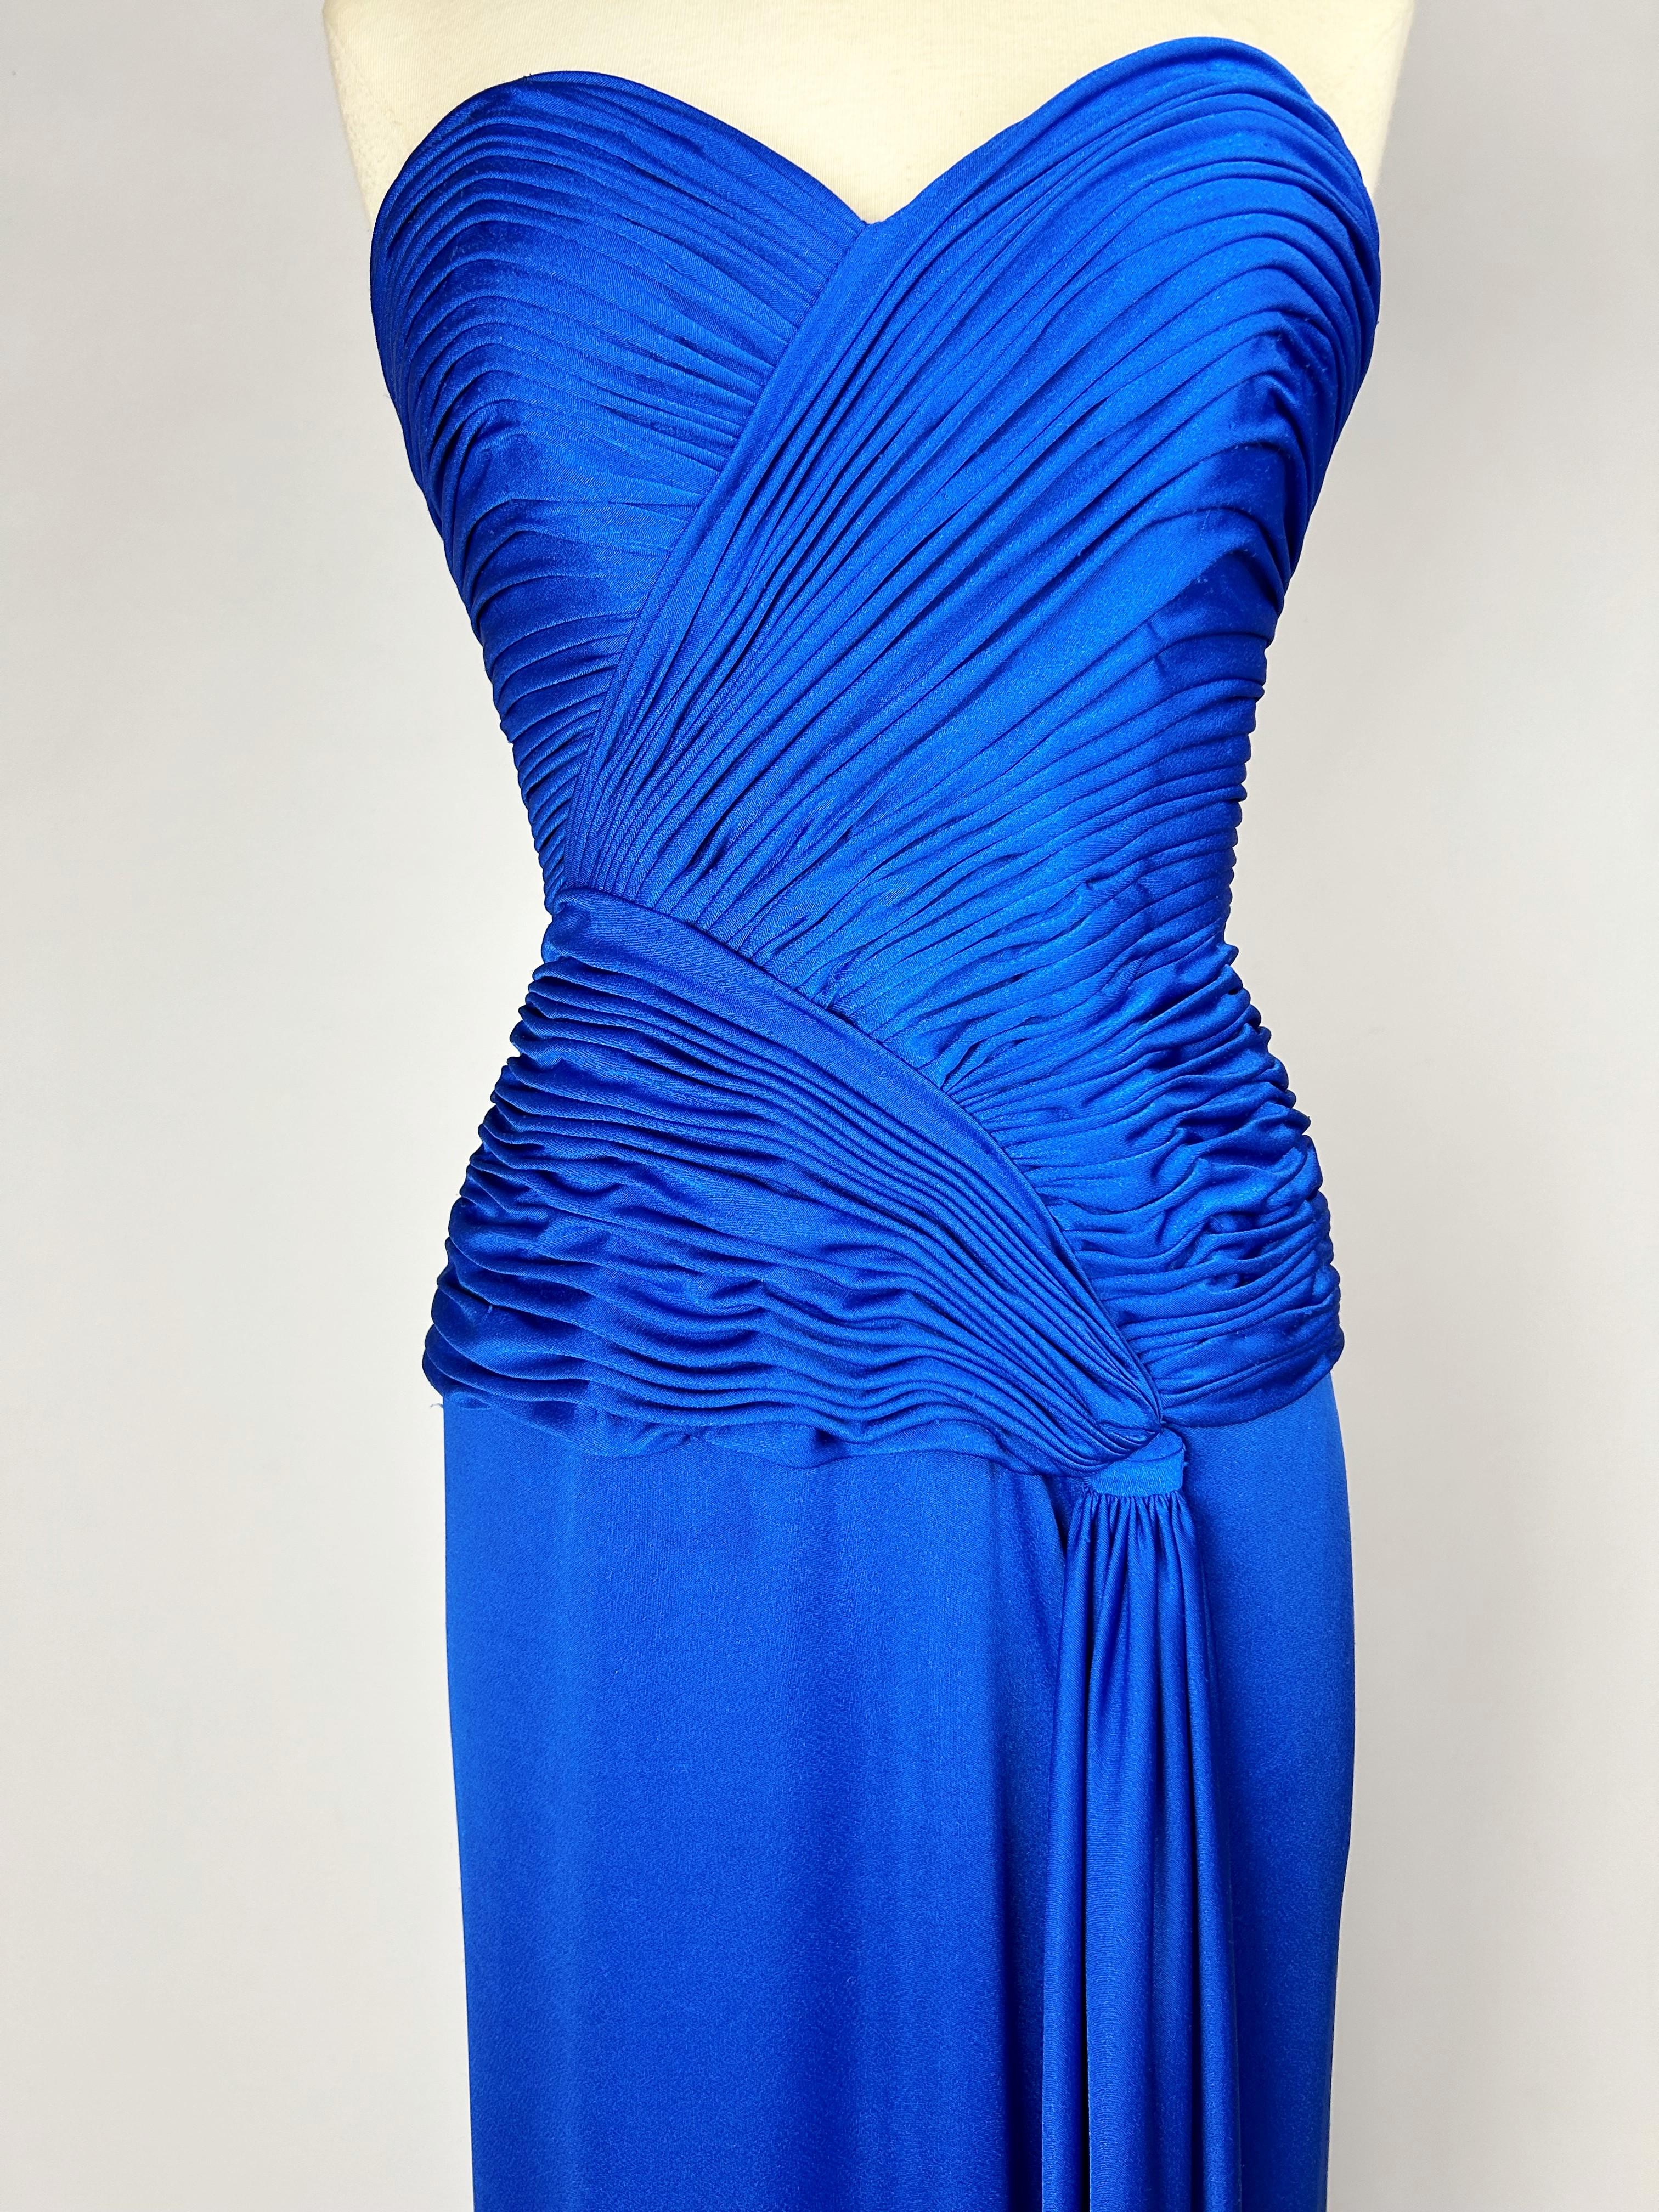 Circa 1980

France

Electric blue lycra jersey evening gown by Loris Azzaro Couture dating from the 1980s. Sheath dress with large plunging neckline and back zip. Bustier with asymmetrical cross pleats underlining the hips and finished with a stole